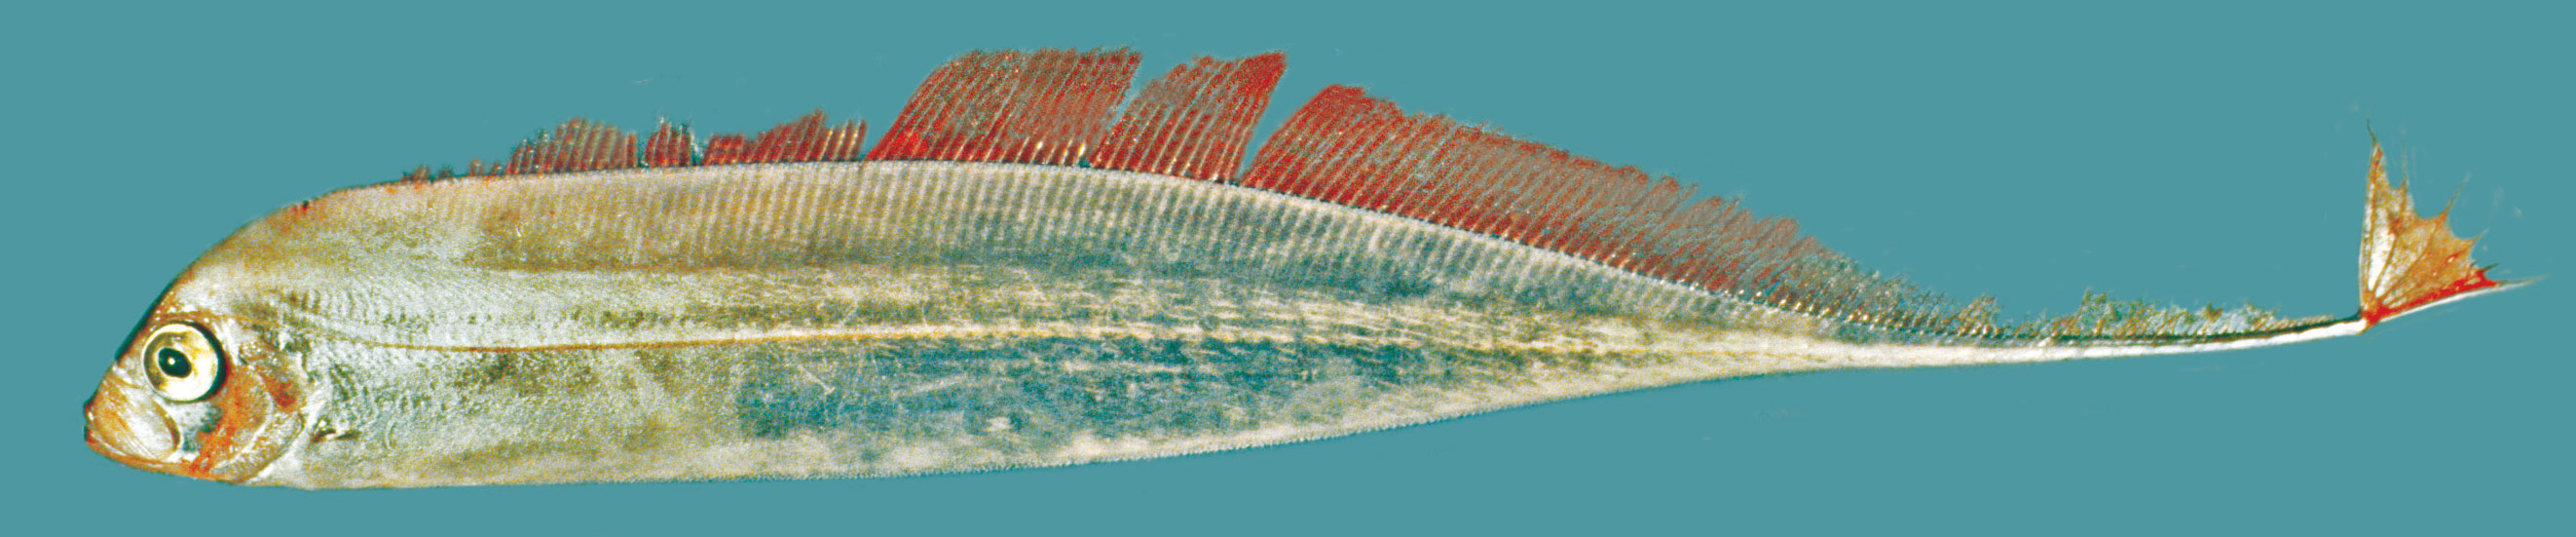 Ribbonfishes, Dealfishes banner